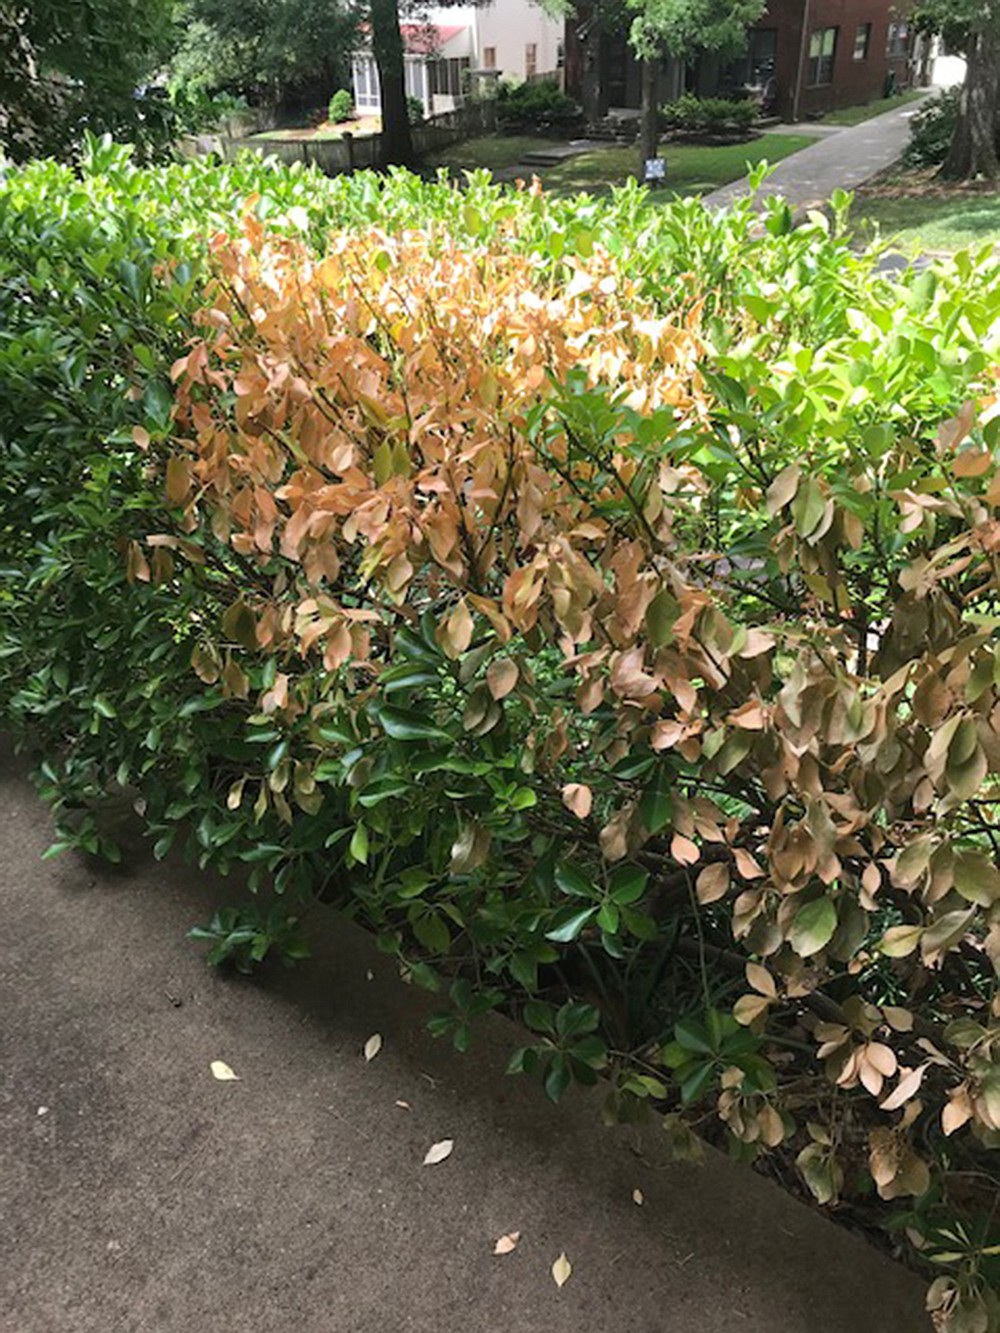 The damage done to this hedge doesn't look much like a disease; it looks like a burn or damage from a chemical spray. (Special to the Democrat-Gazette)